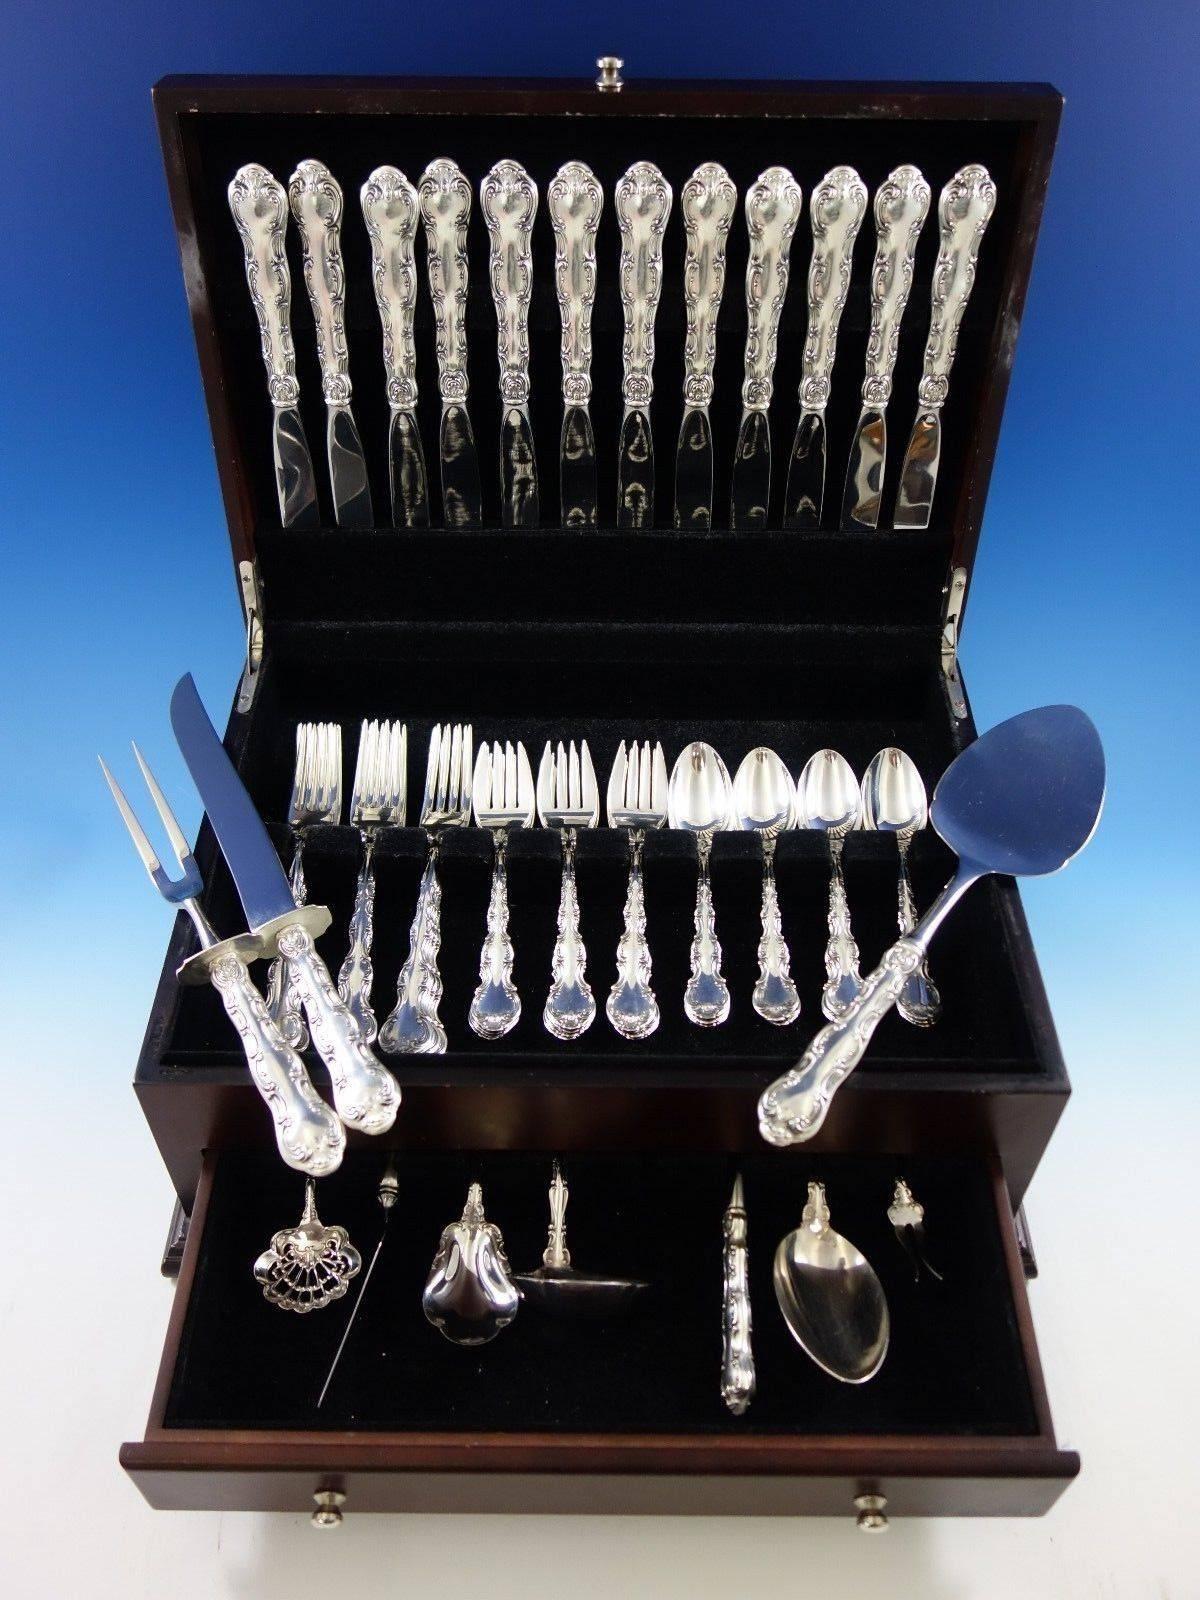 Strasbourg by Gorham sterling silver flatware set - 40 pieces. This set includes: 

12 place knives, 9 1/4